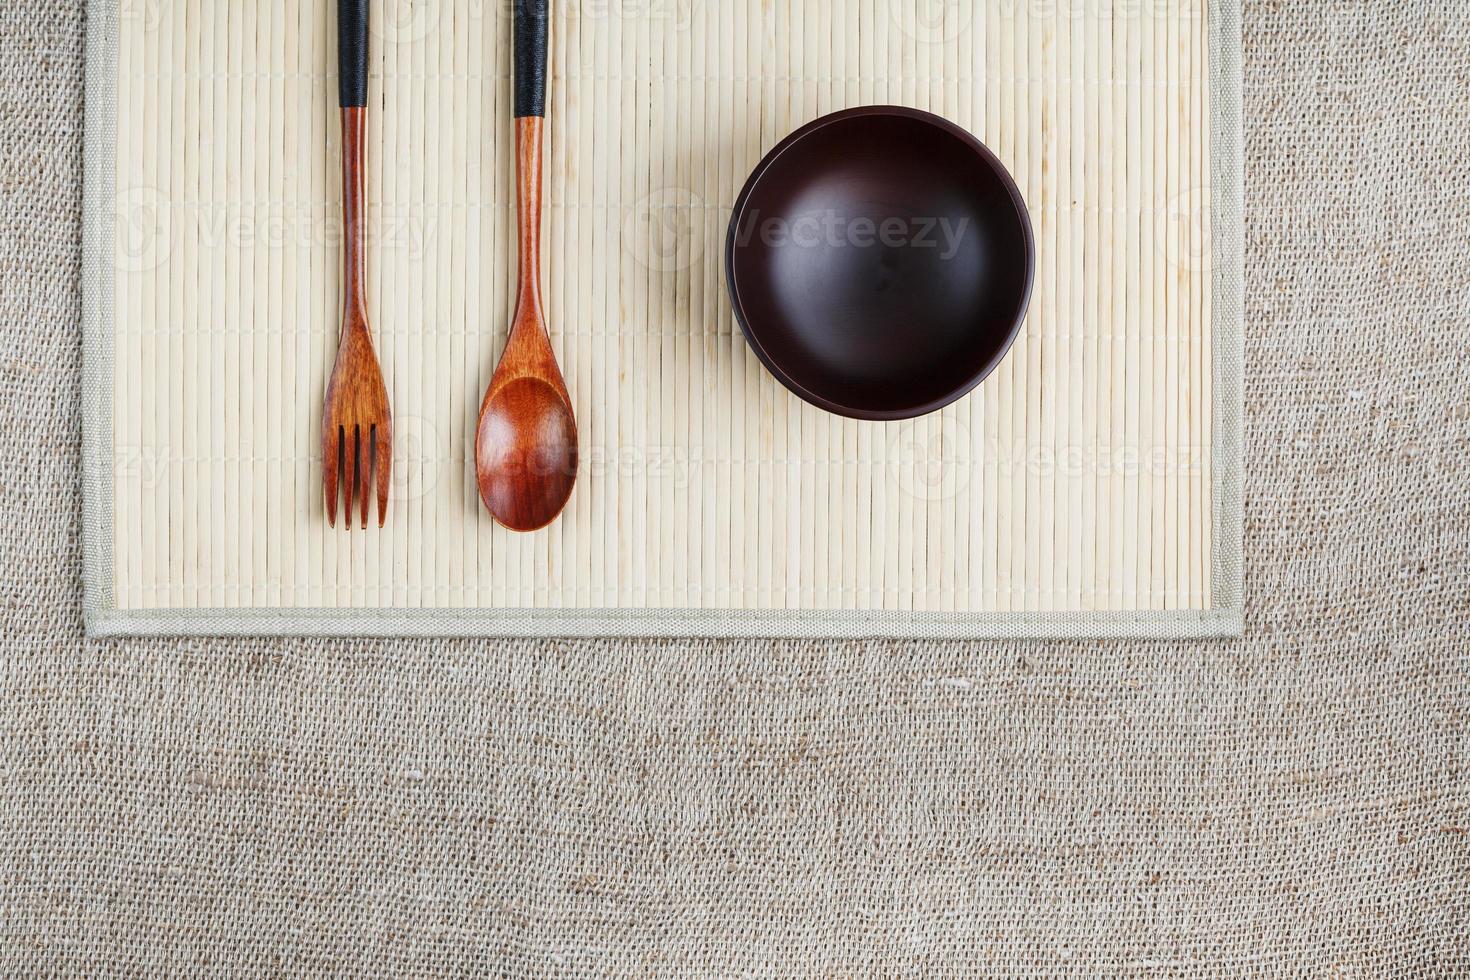 Empty dark wooden cup, spoon and fork made of natural wood on a light bamboo backing photo